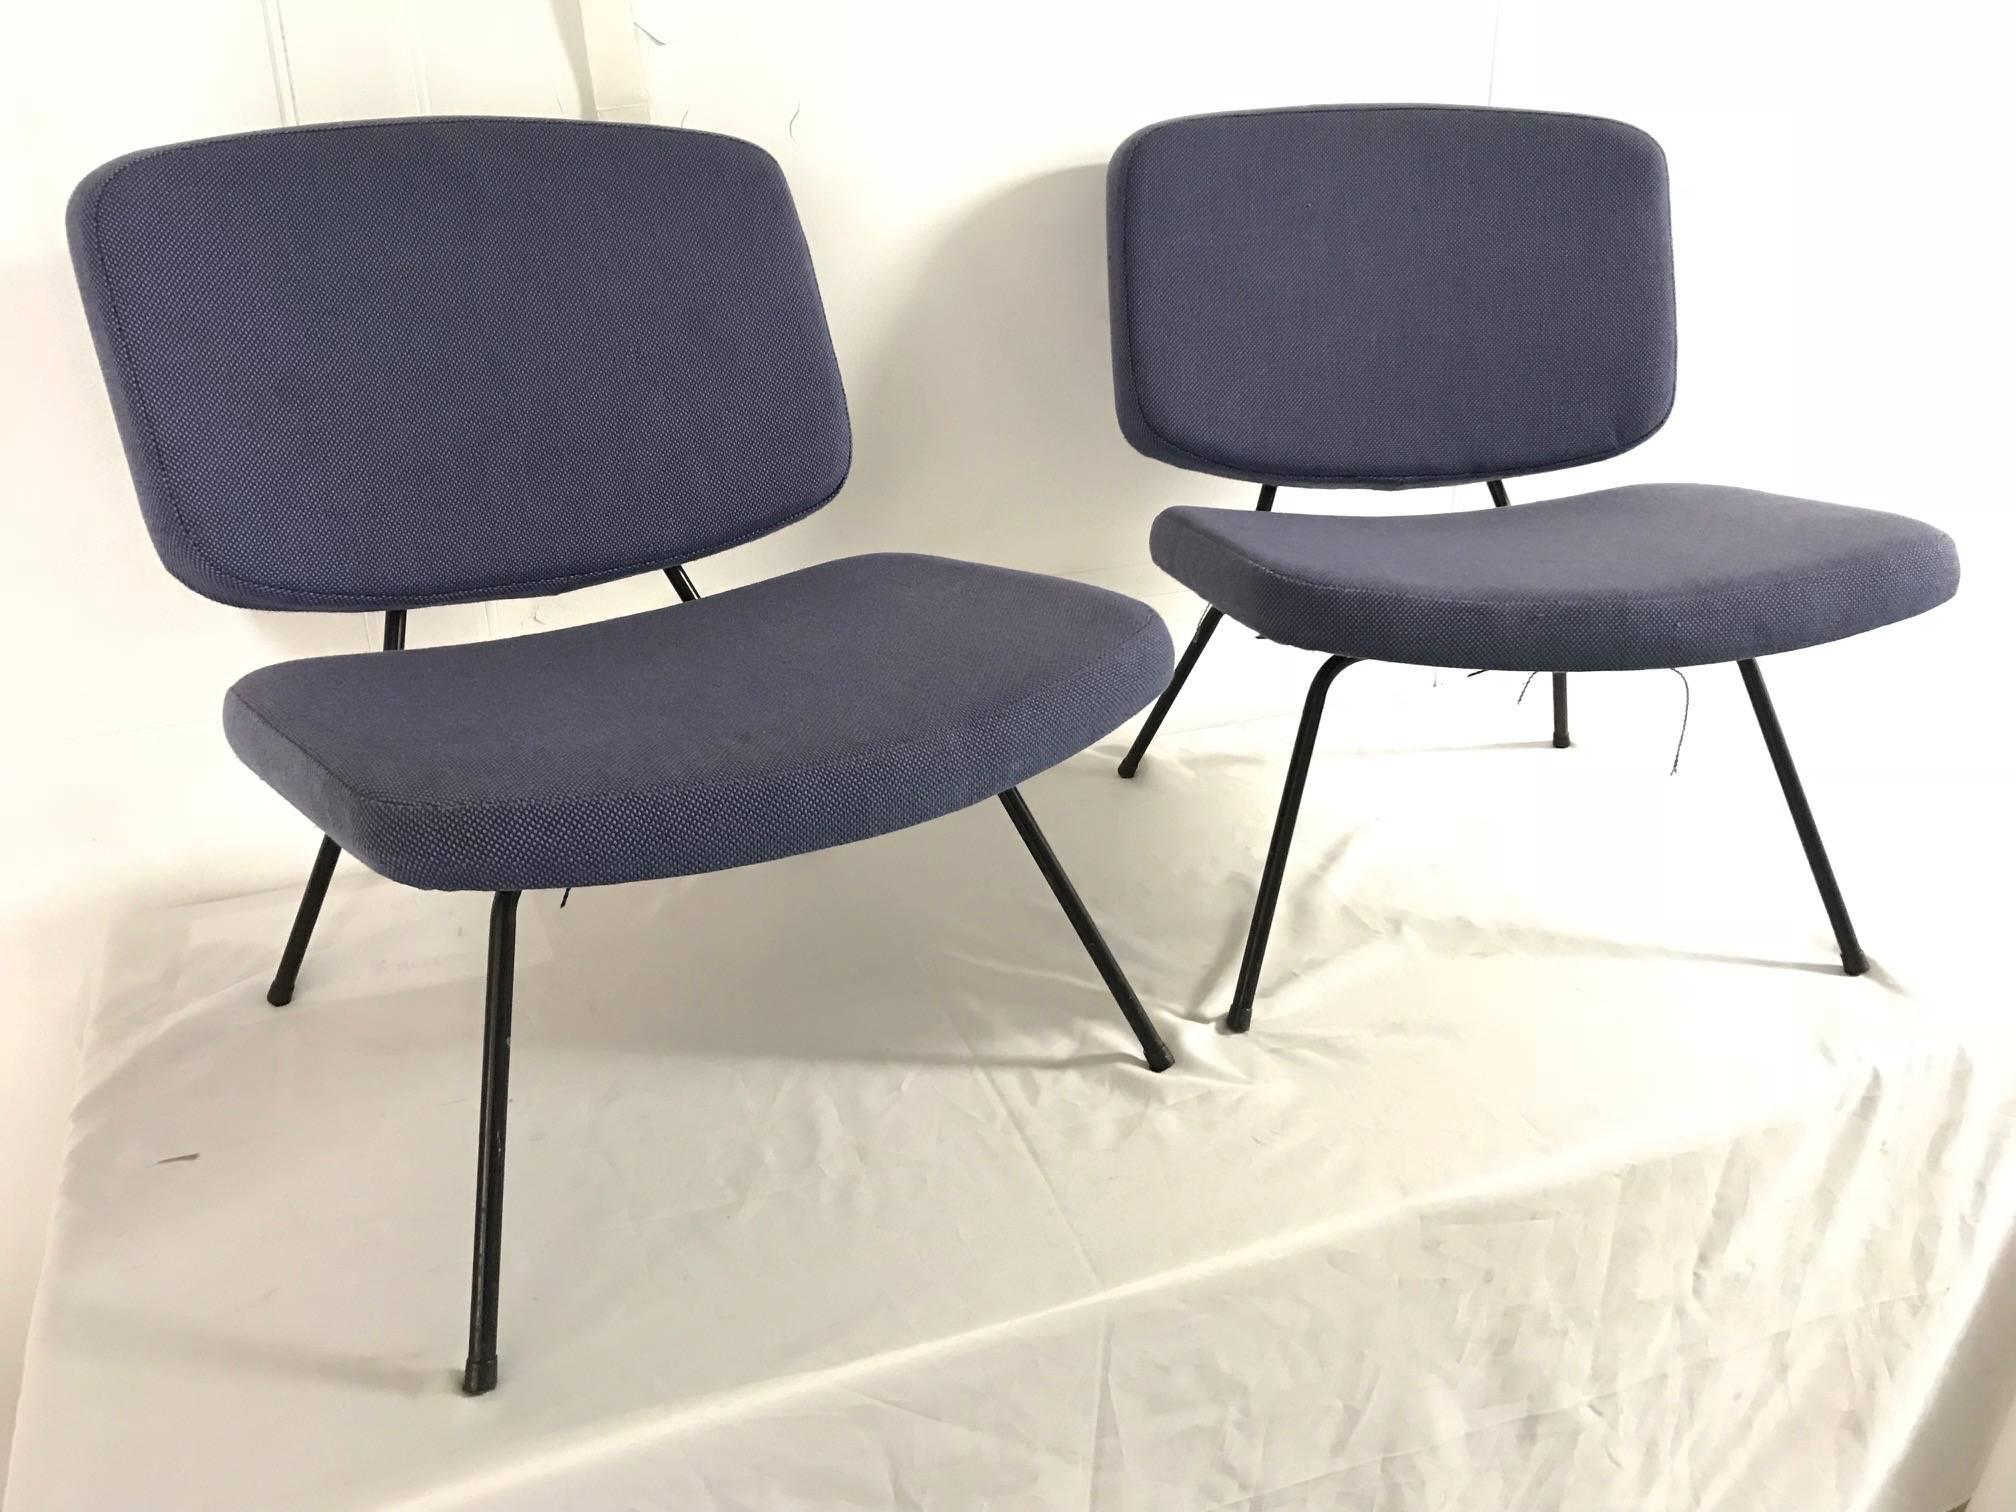 CM190 slipper chairs by Pierre Paulin, France, Thonet editions.